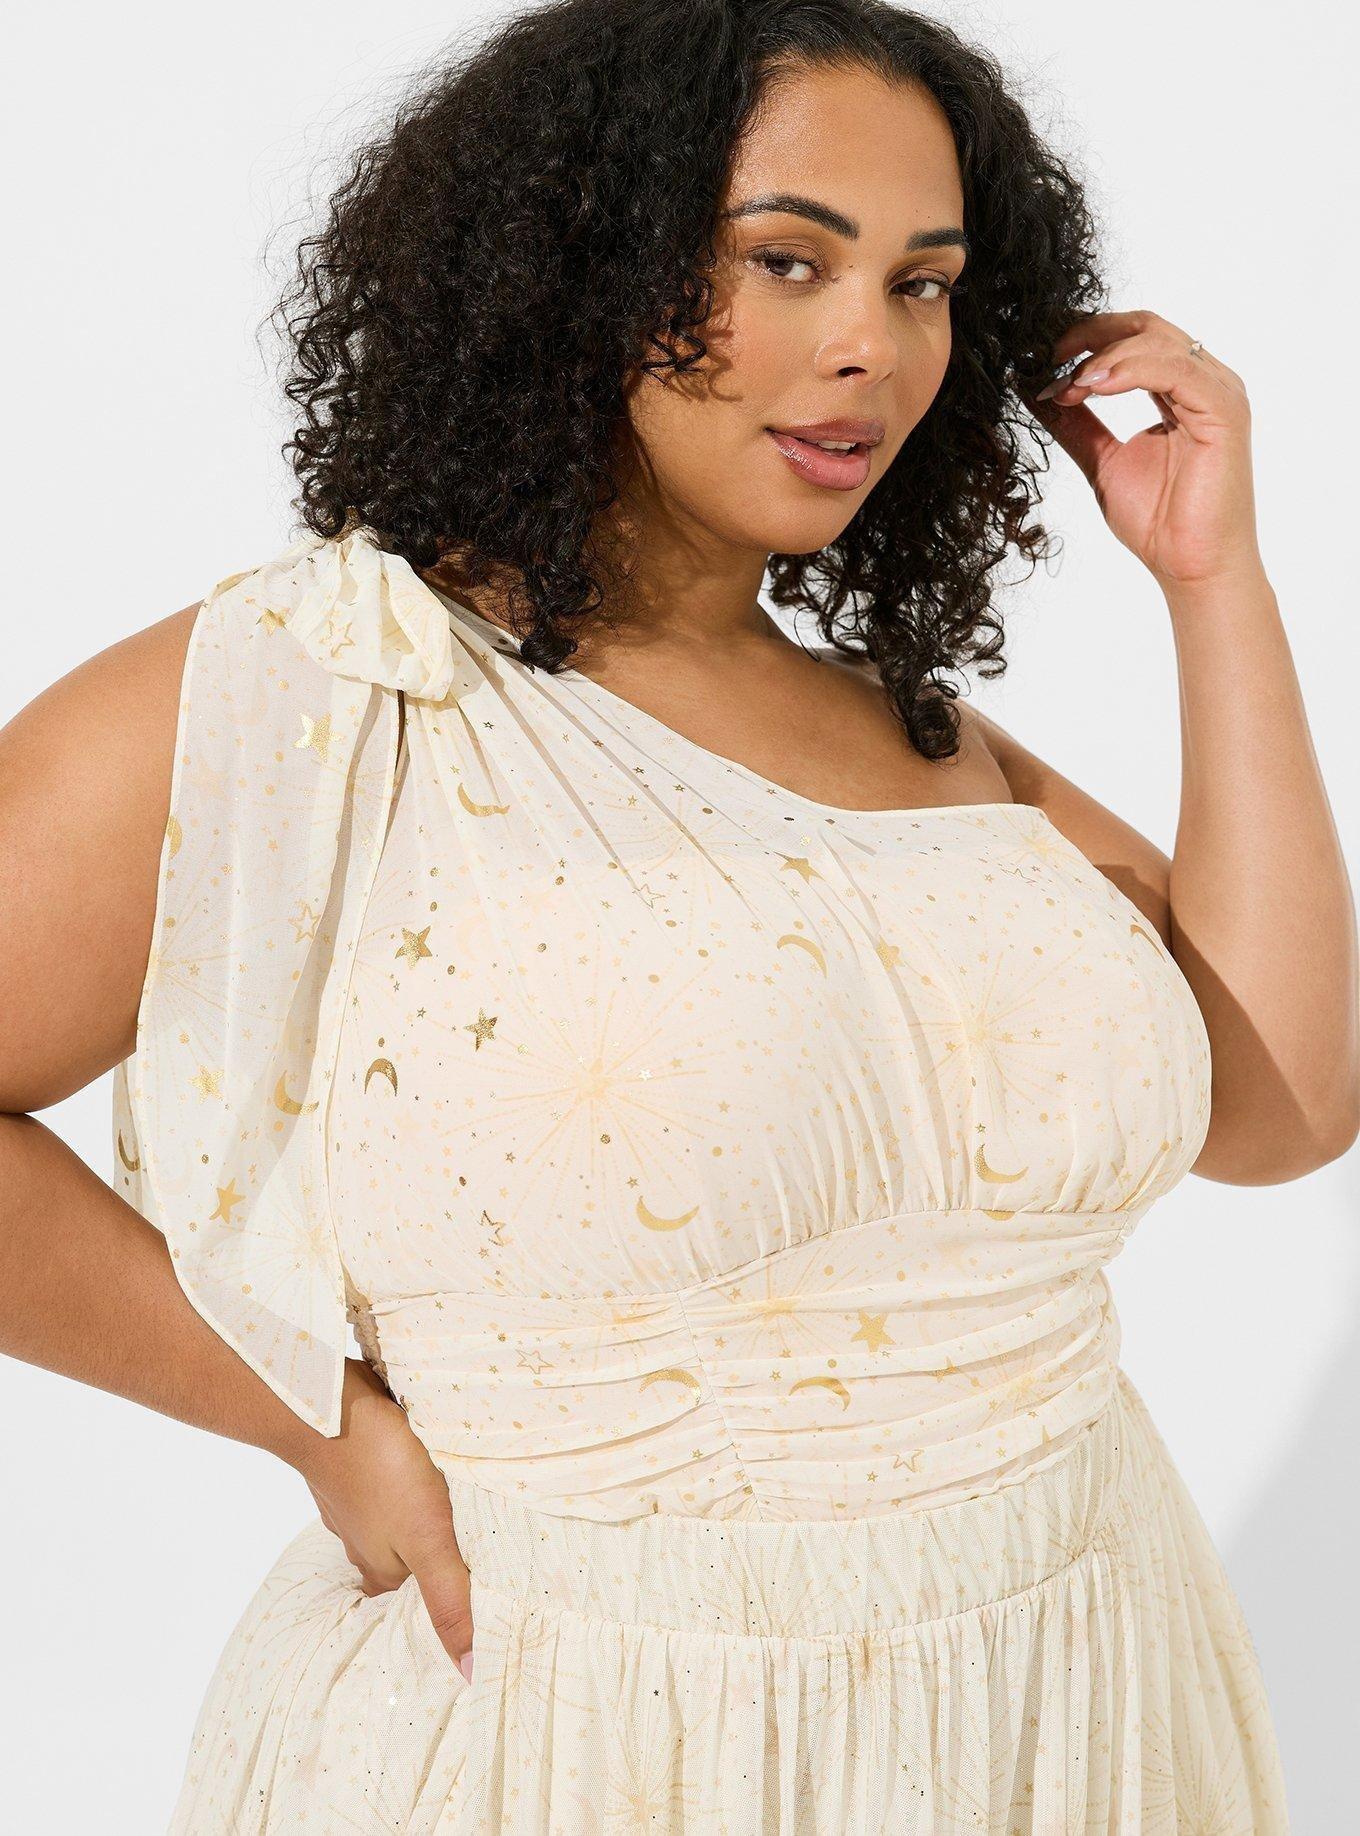 Plus Size Dresses for sale in Hayward, Oklahoma